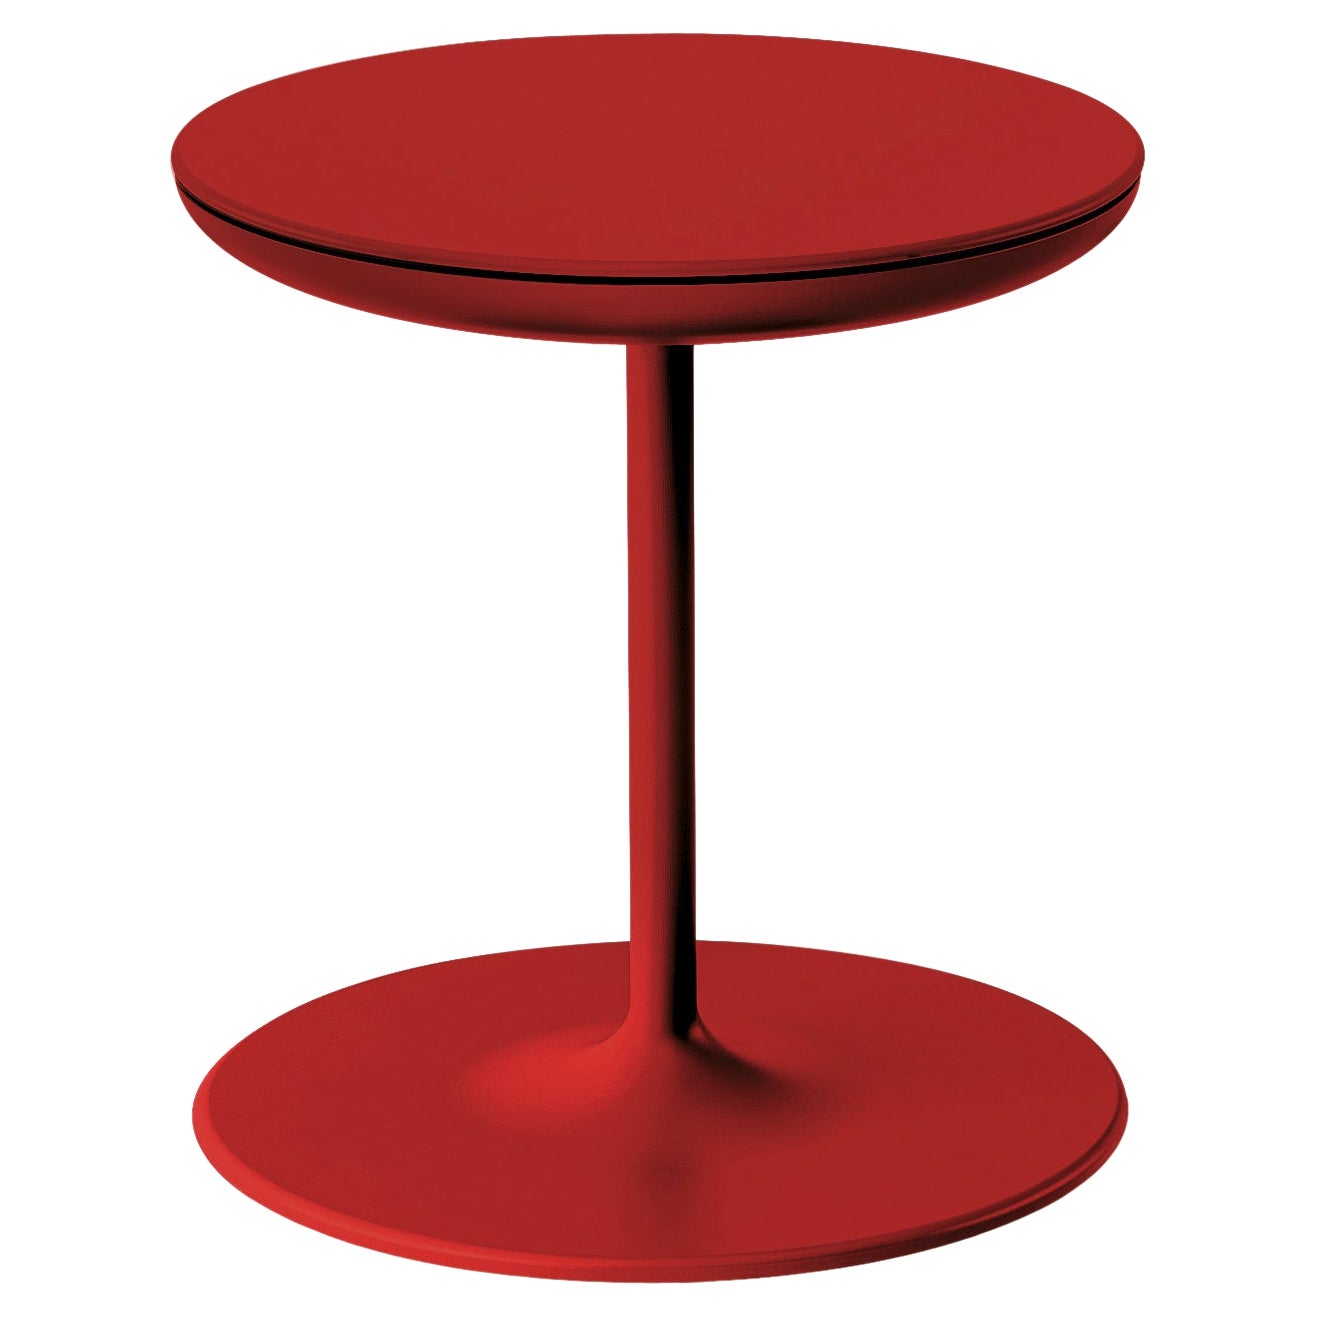 Zanotta Toi Small Table in Red Finish with Plywood Top by Salvatore Indriolo For Sale